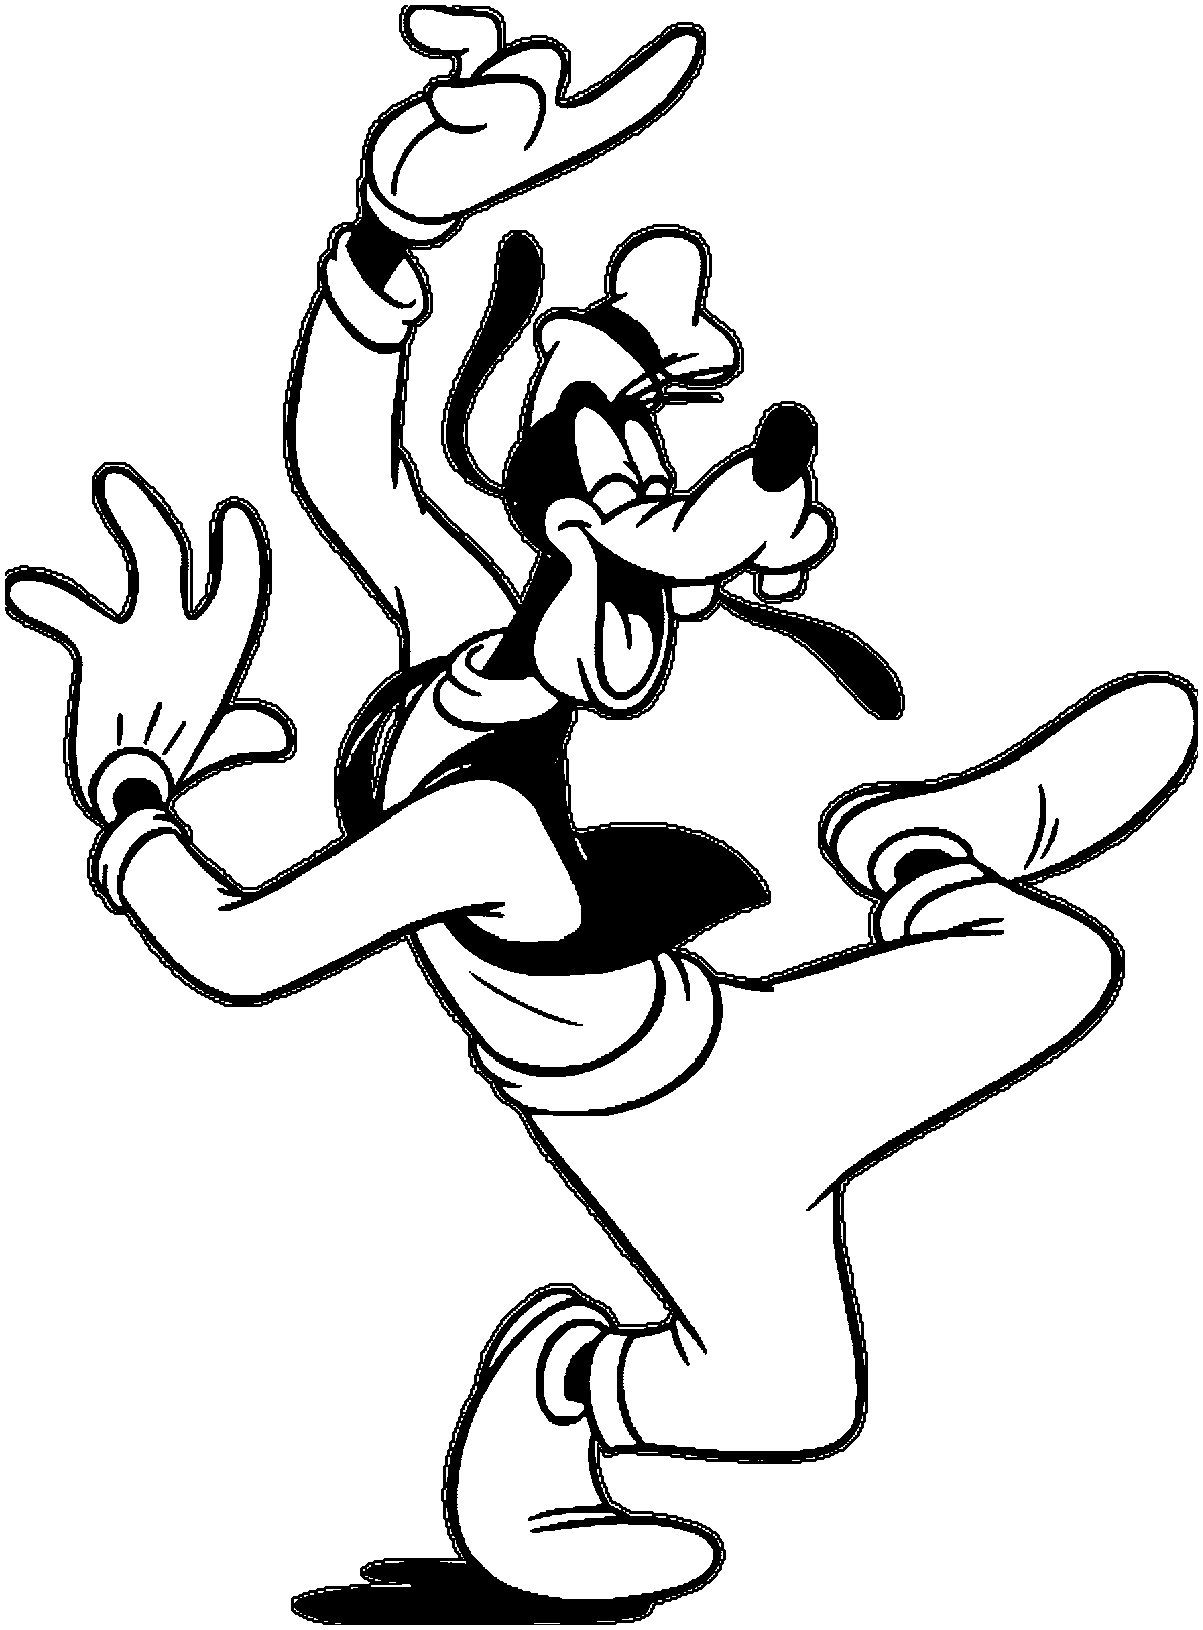 Goofy coloring pages. Download and print Goofy coloring pages